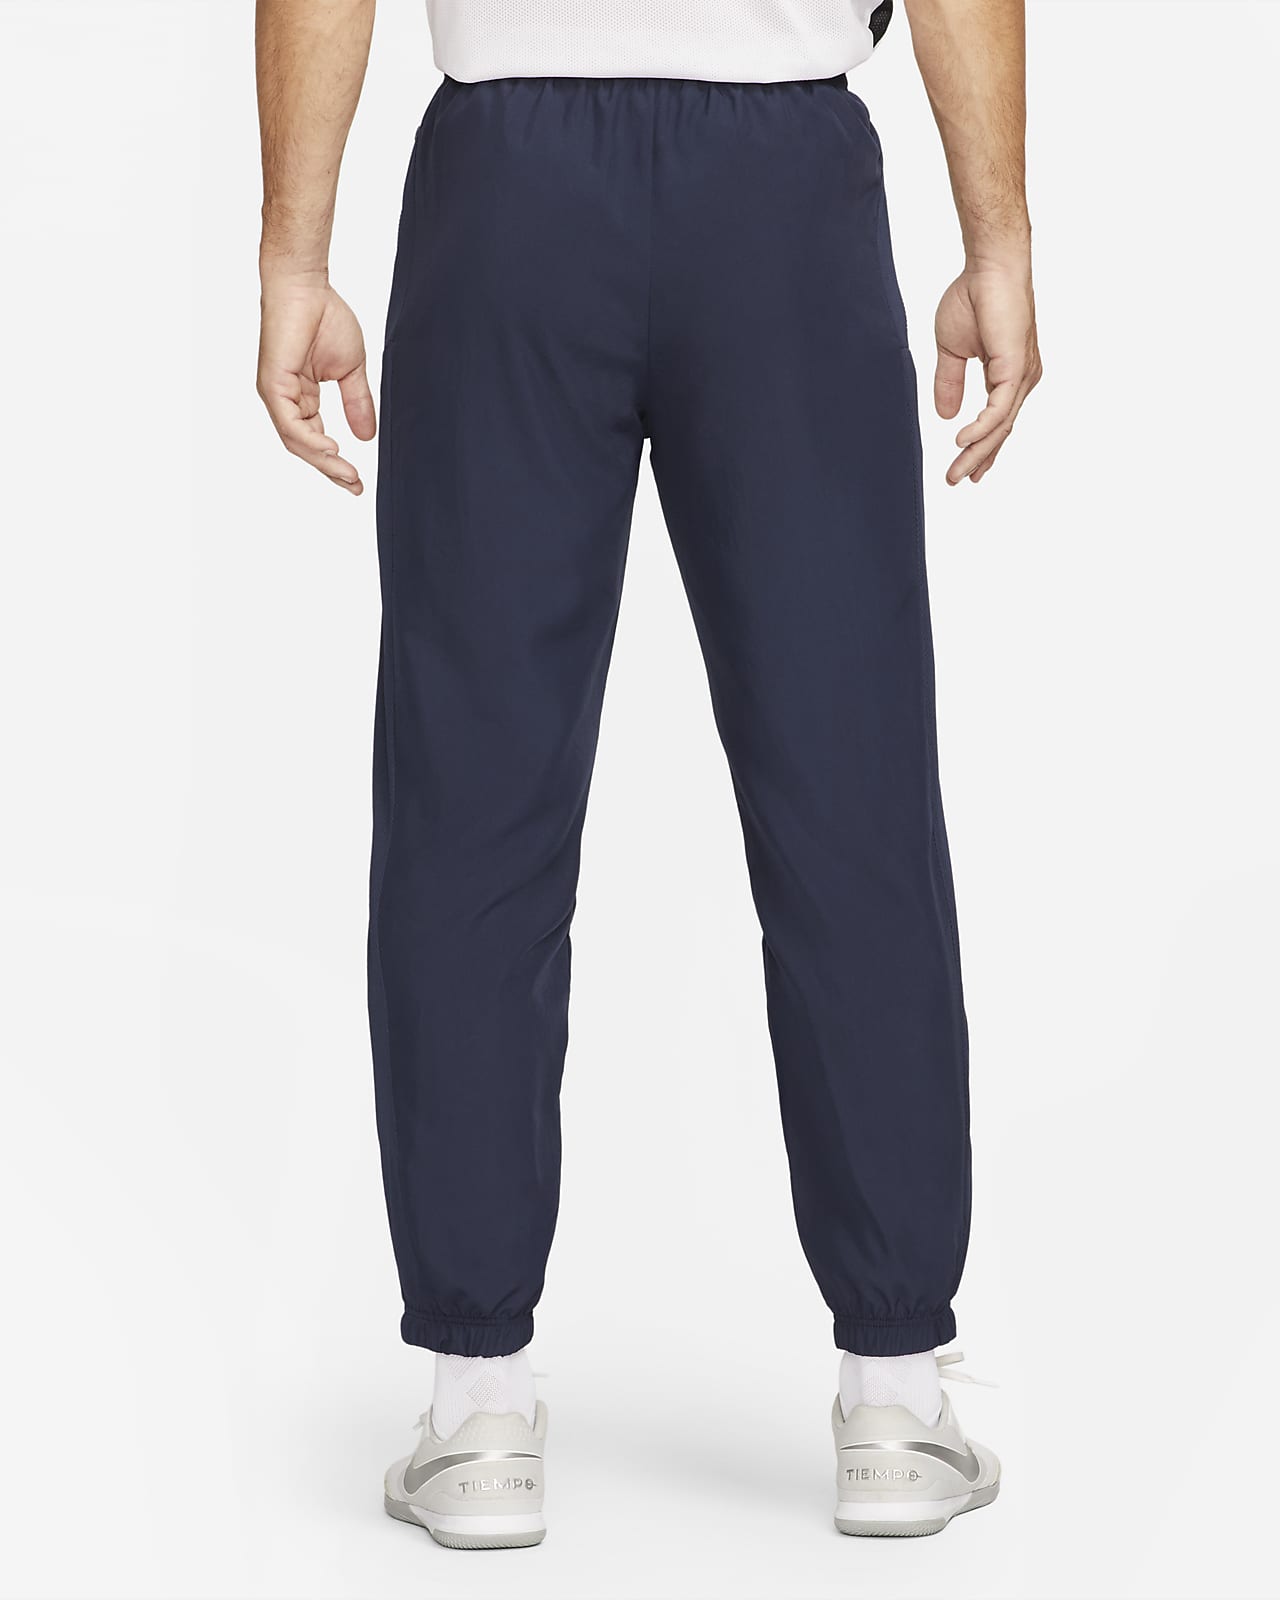 Dri-FIT Academy Woven Tracksuit Bottoms. Nike ID